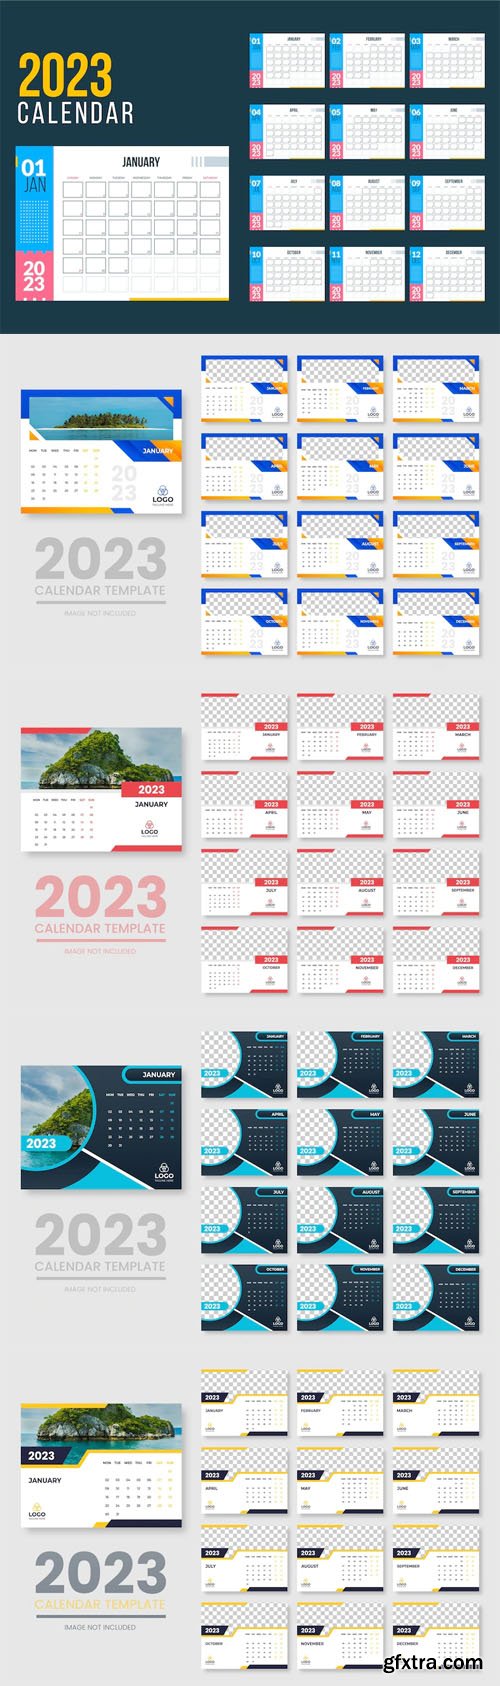 5 Clean Calendars for New Year 2023 Vector Templates